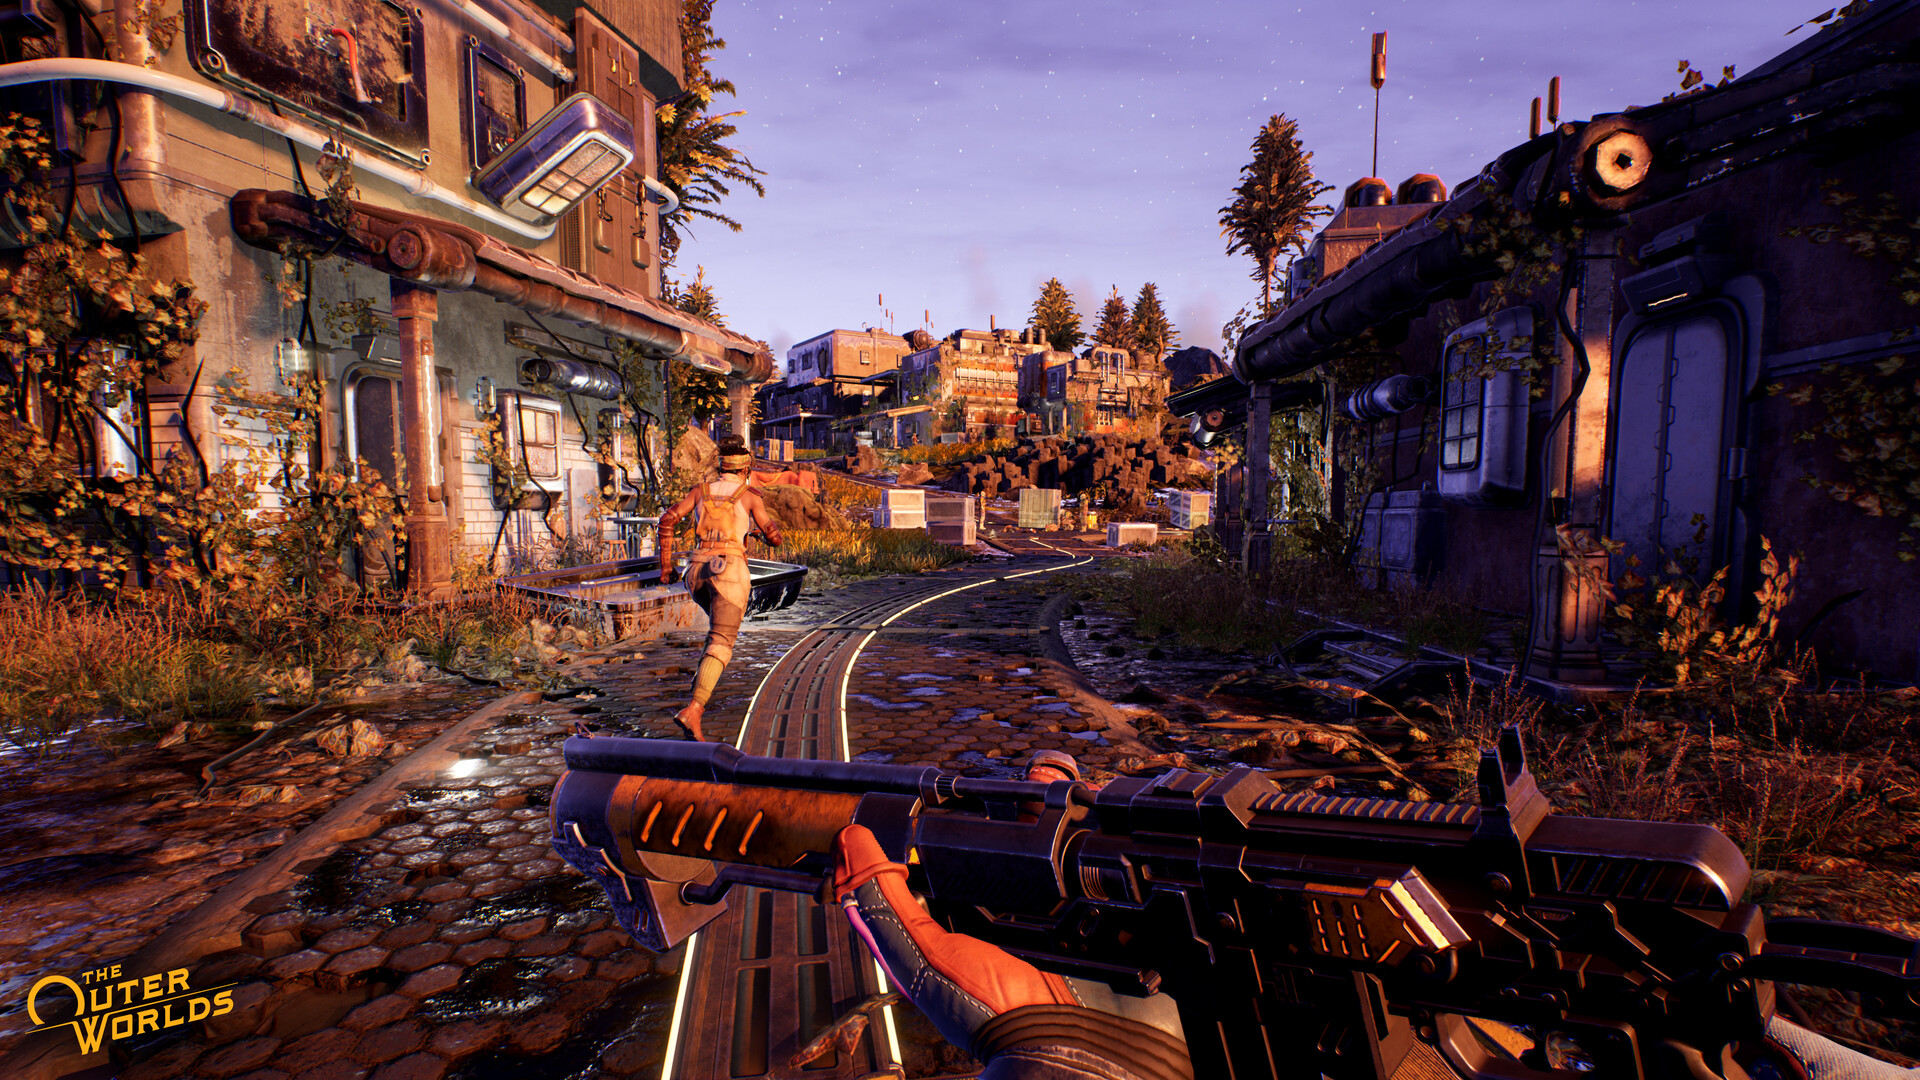 Pc game world. The Outer Worlds (2019). The Outer Worlds ps4. The Outer Worlds игра, 2019). Аут ворлд.